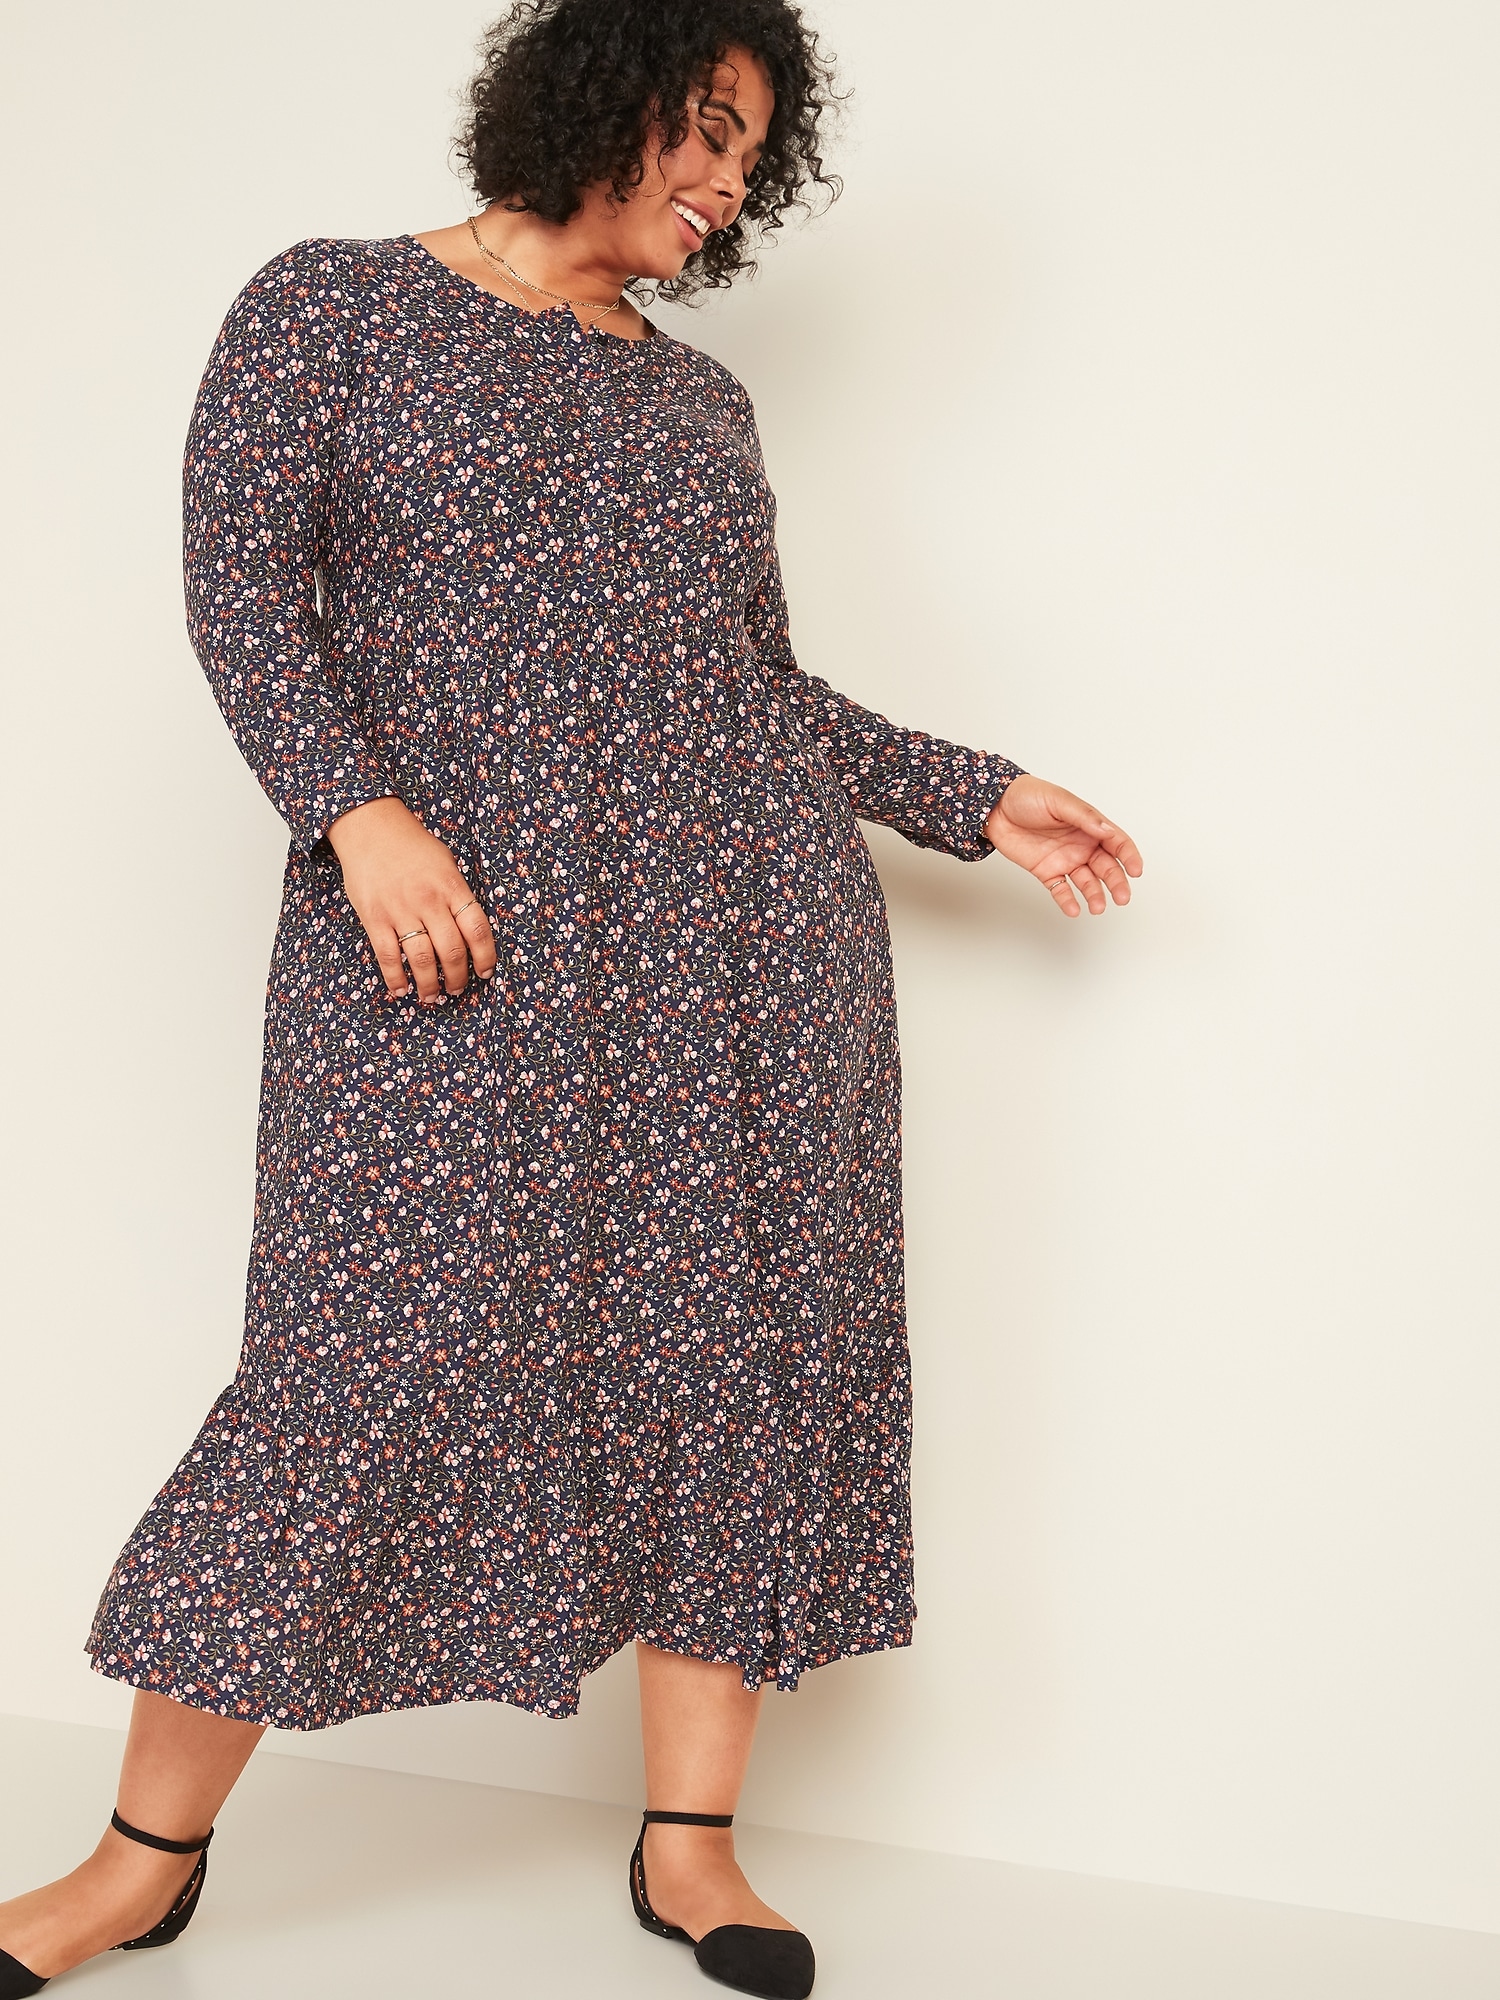 old navy floral maxi dress